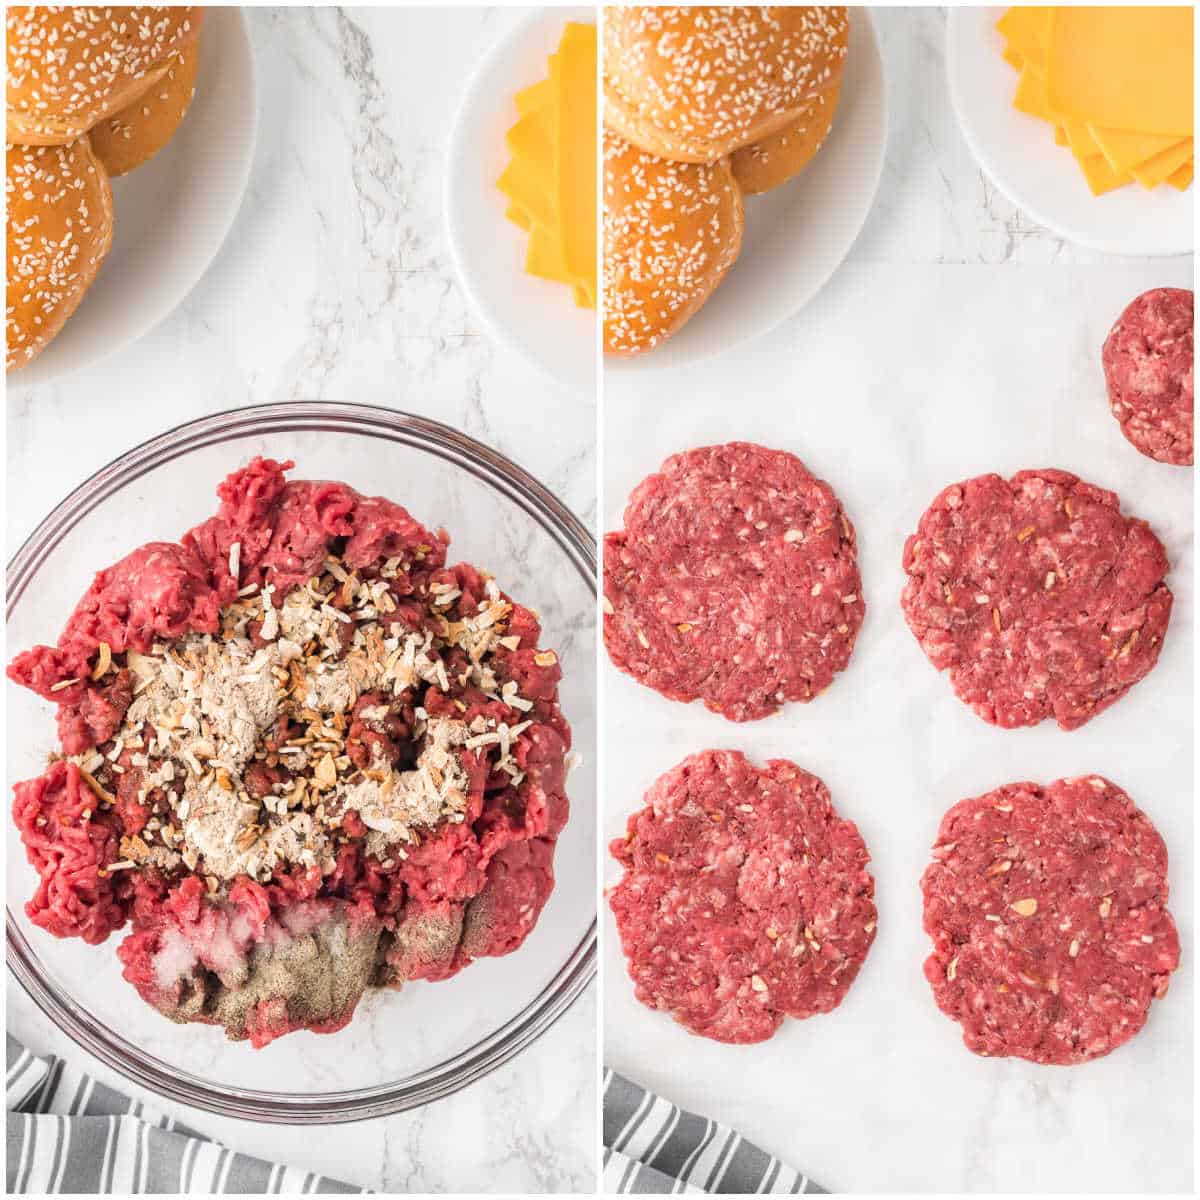 Steps to make juicy lucy burgers.